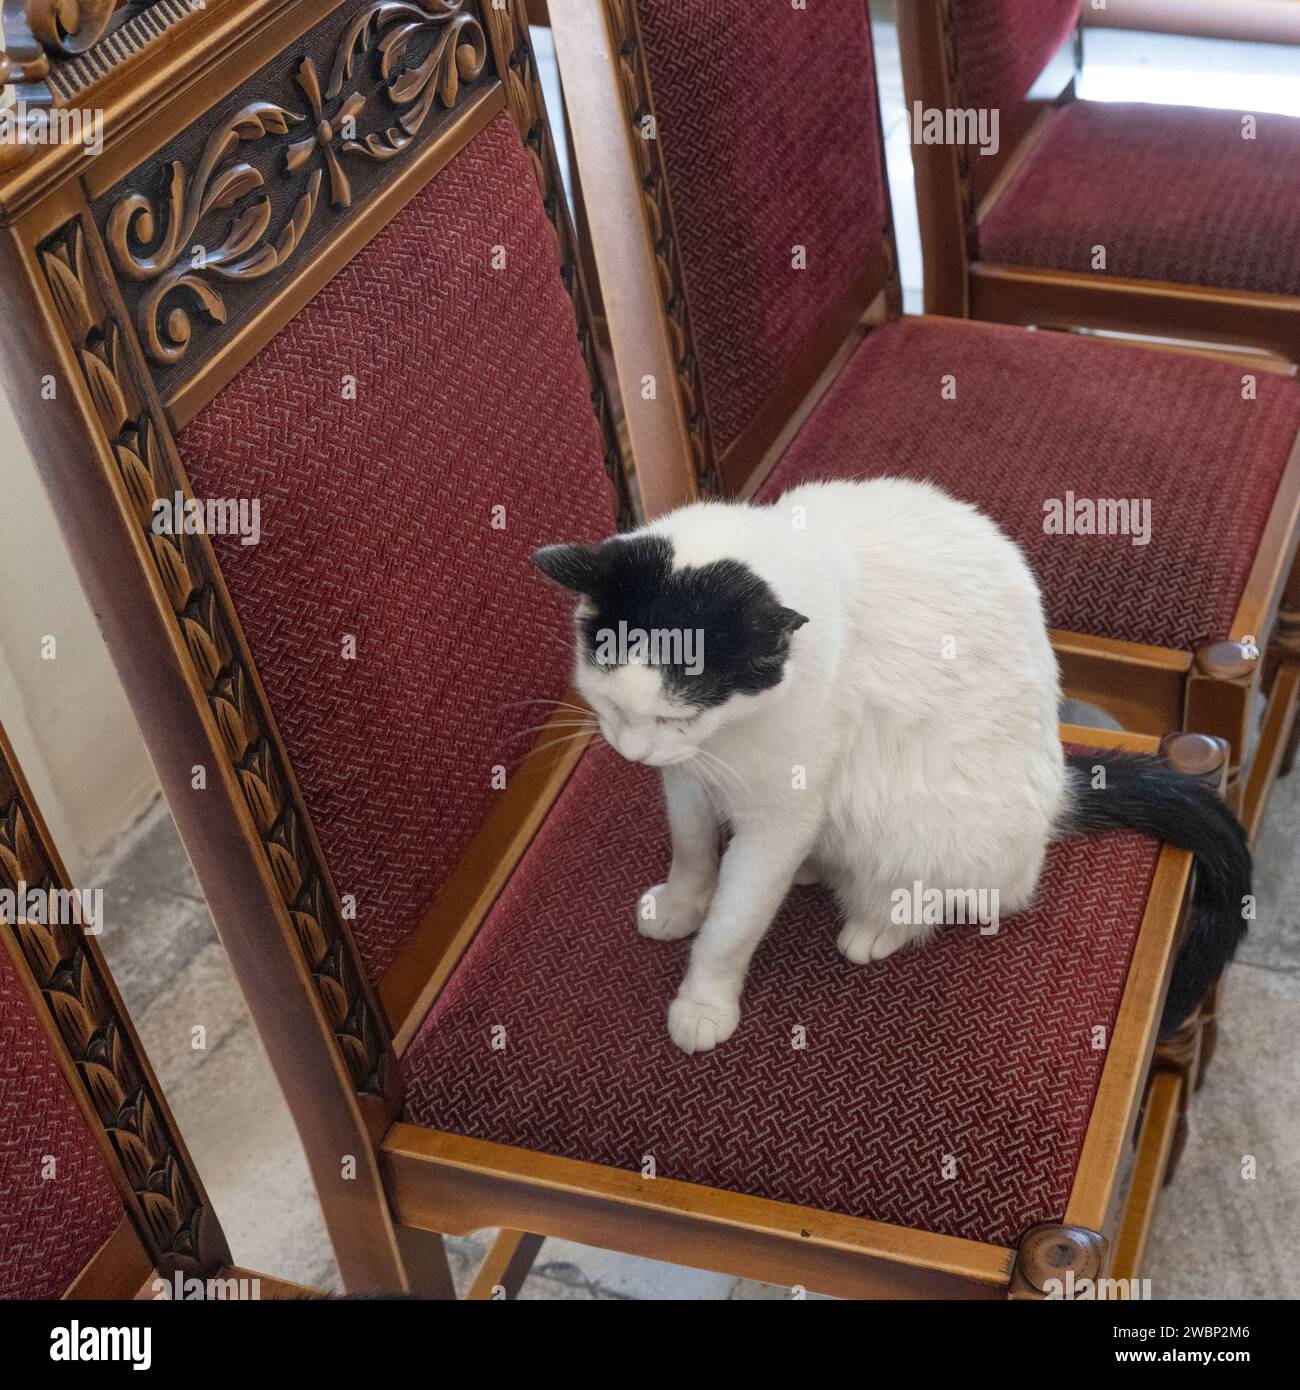 A cat on a chair in The Monastery of Panagia Tourliani, Ano Mera, Mykonos Greece Stock Photo